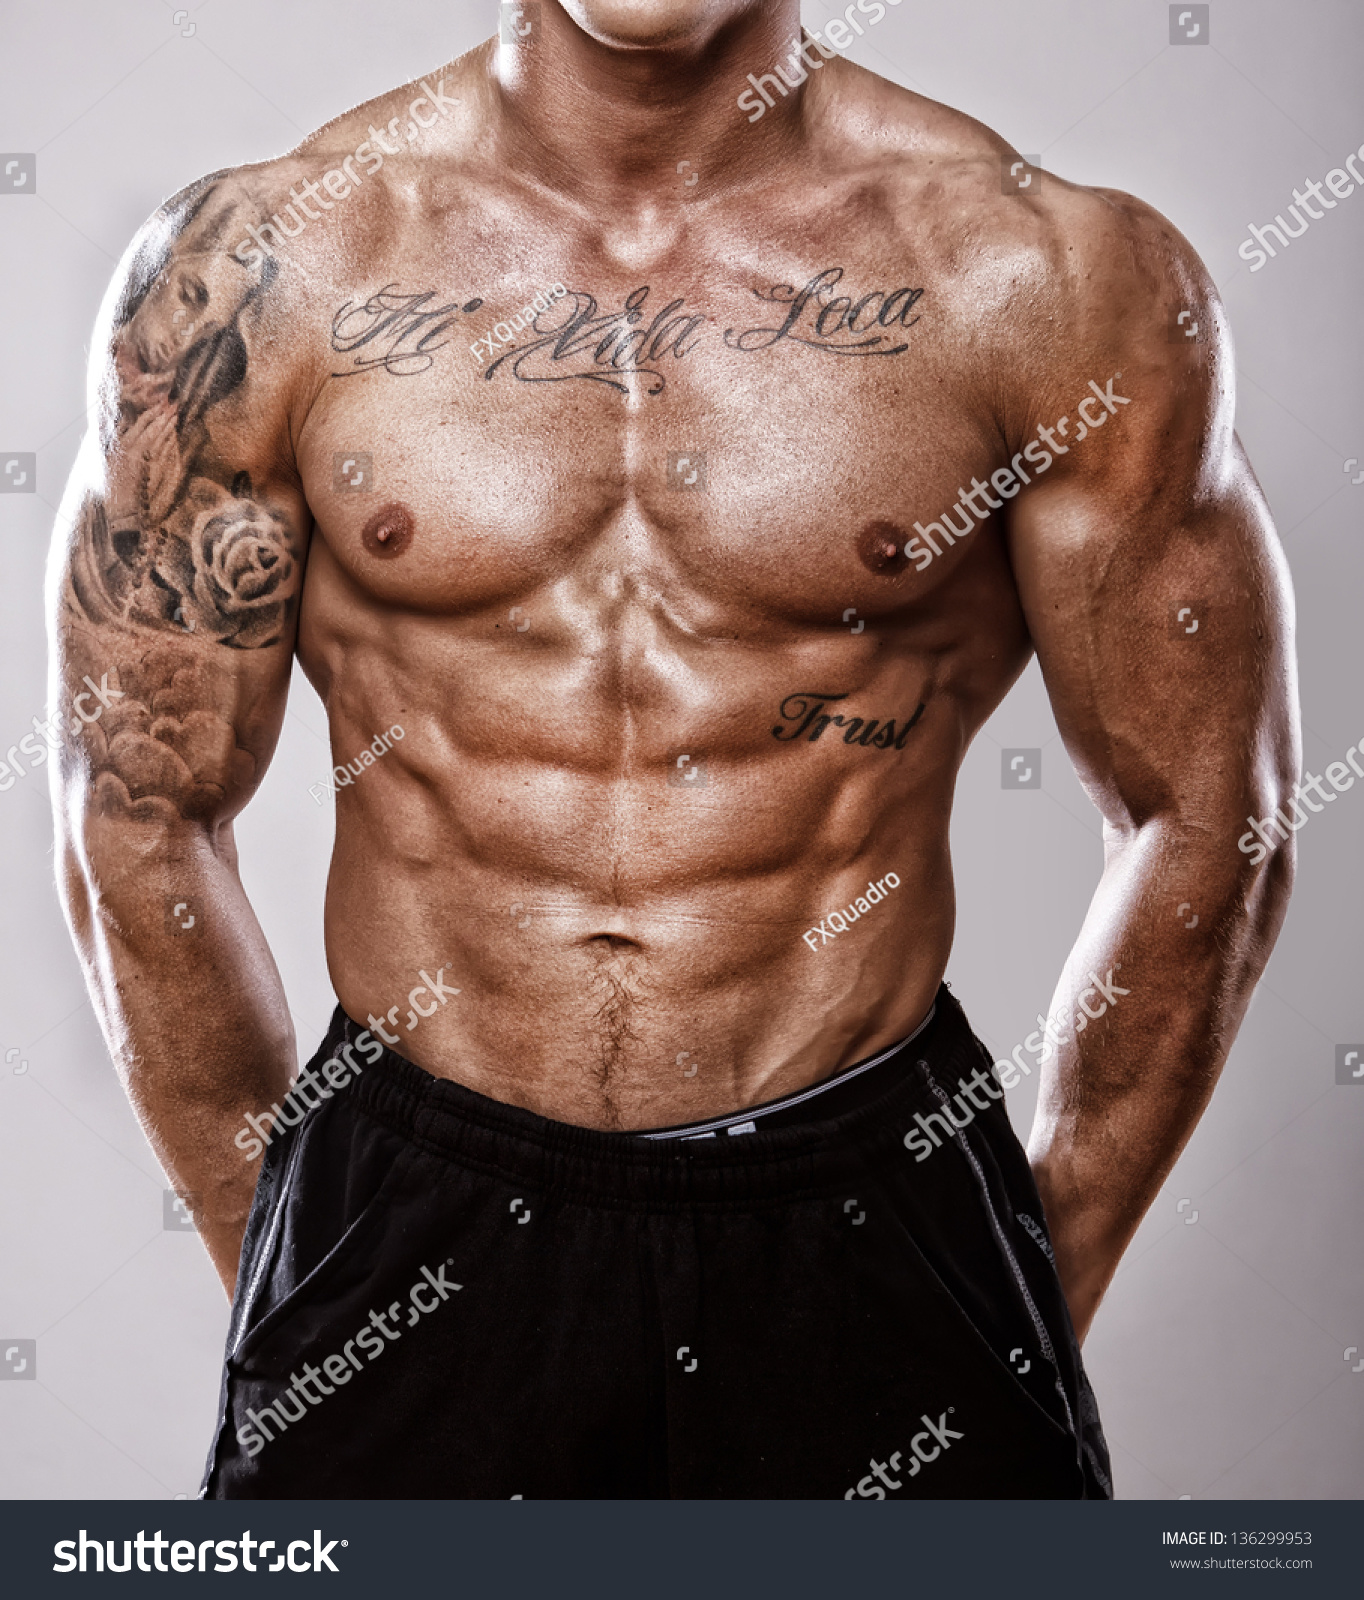 Image Of Well Trained Tattooed Male Body Stock Photo 136299953